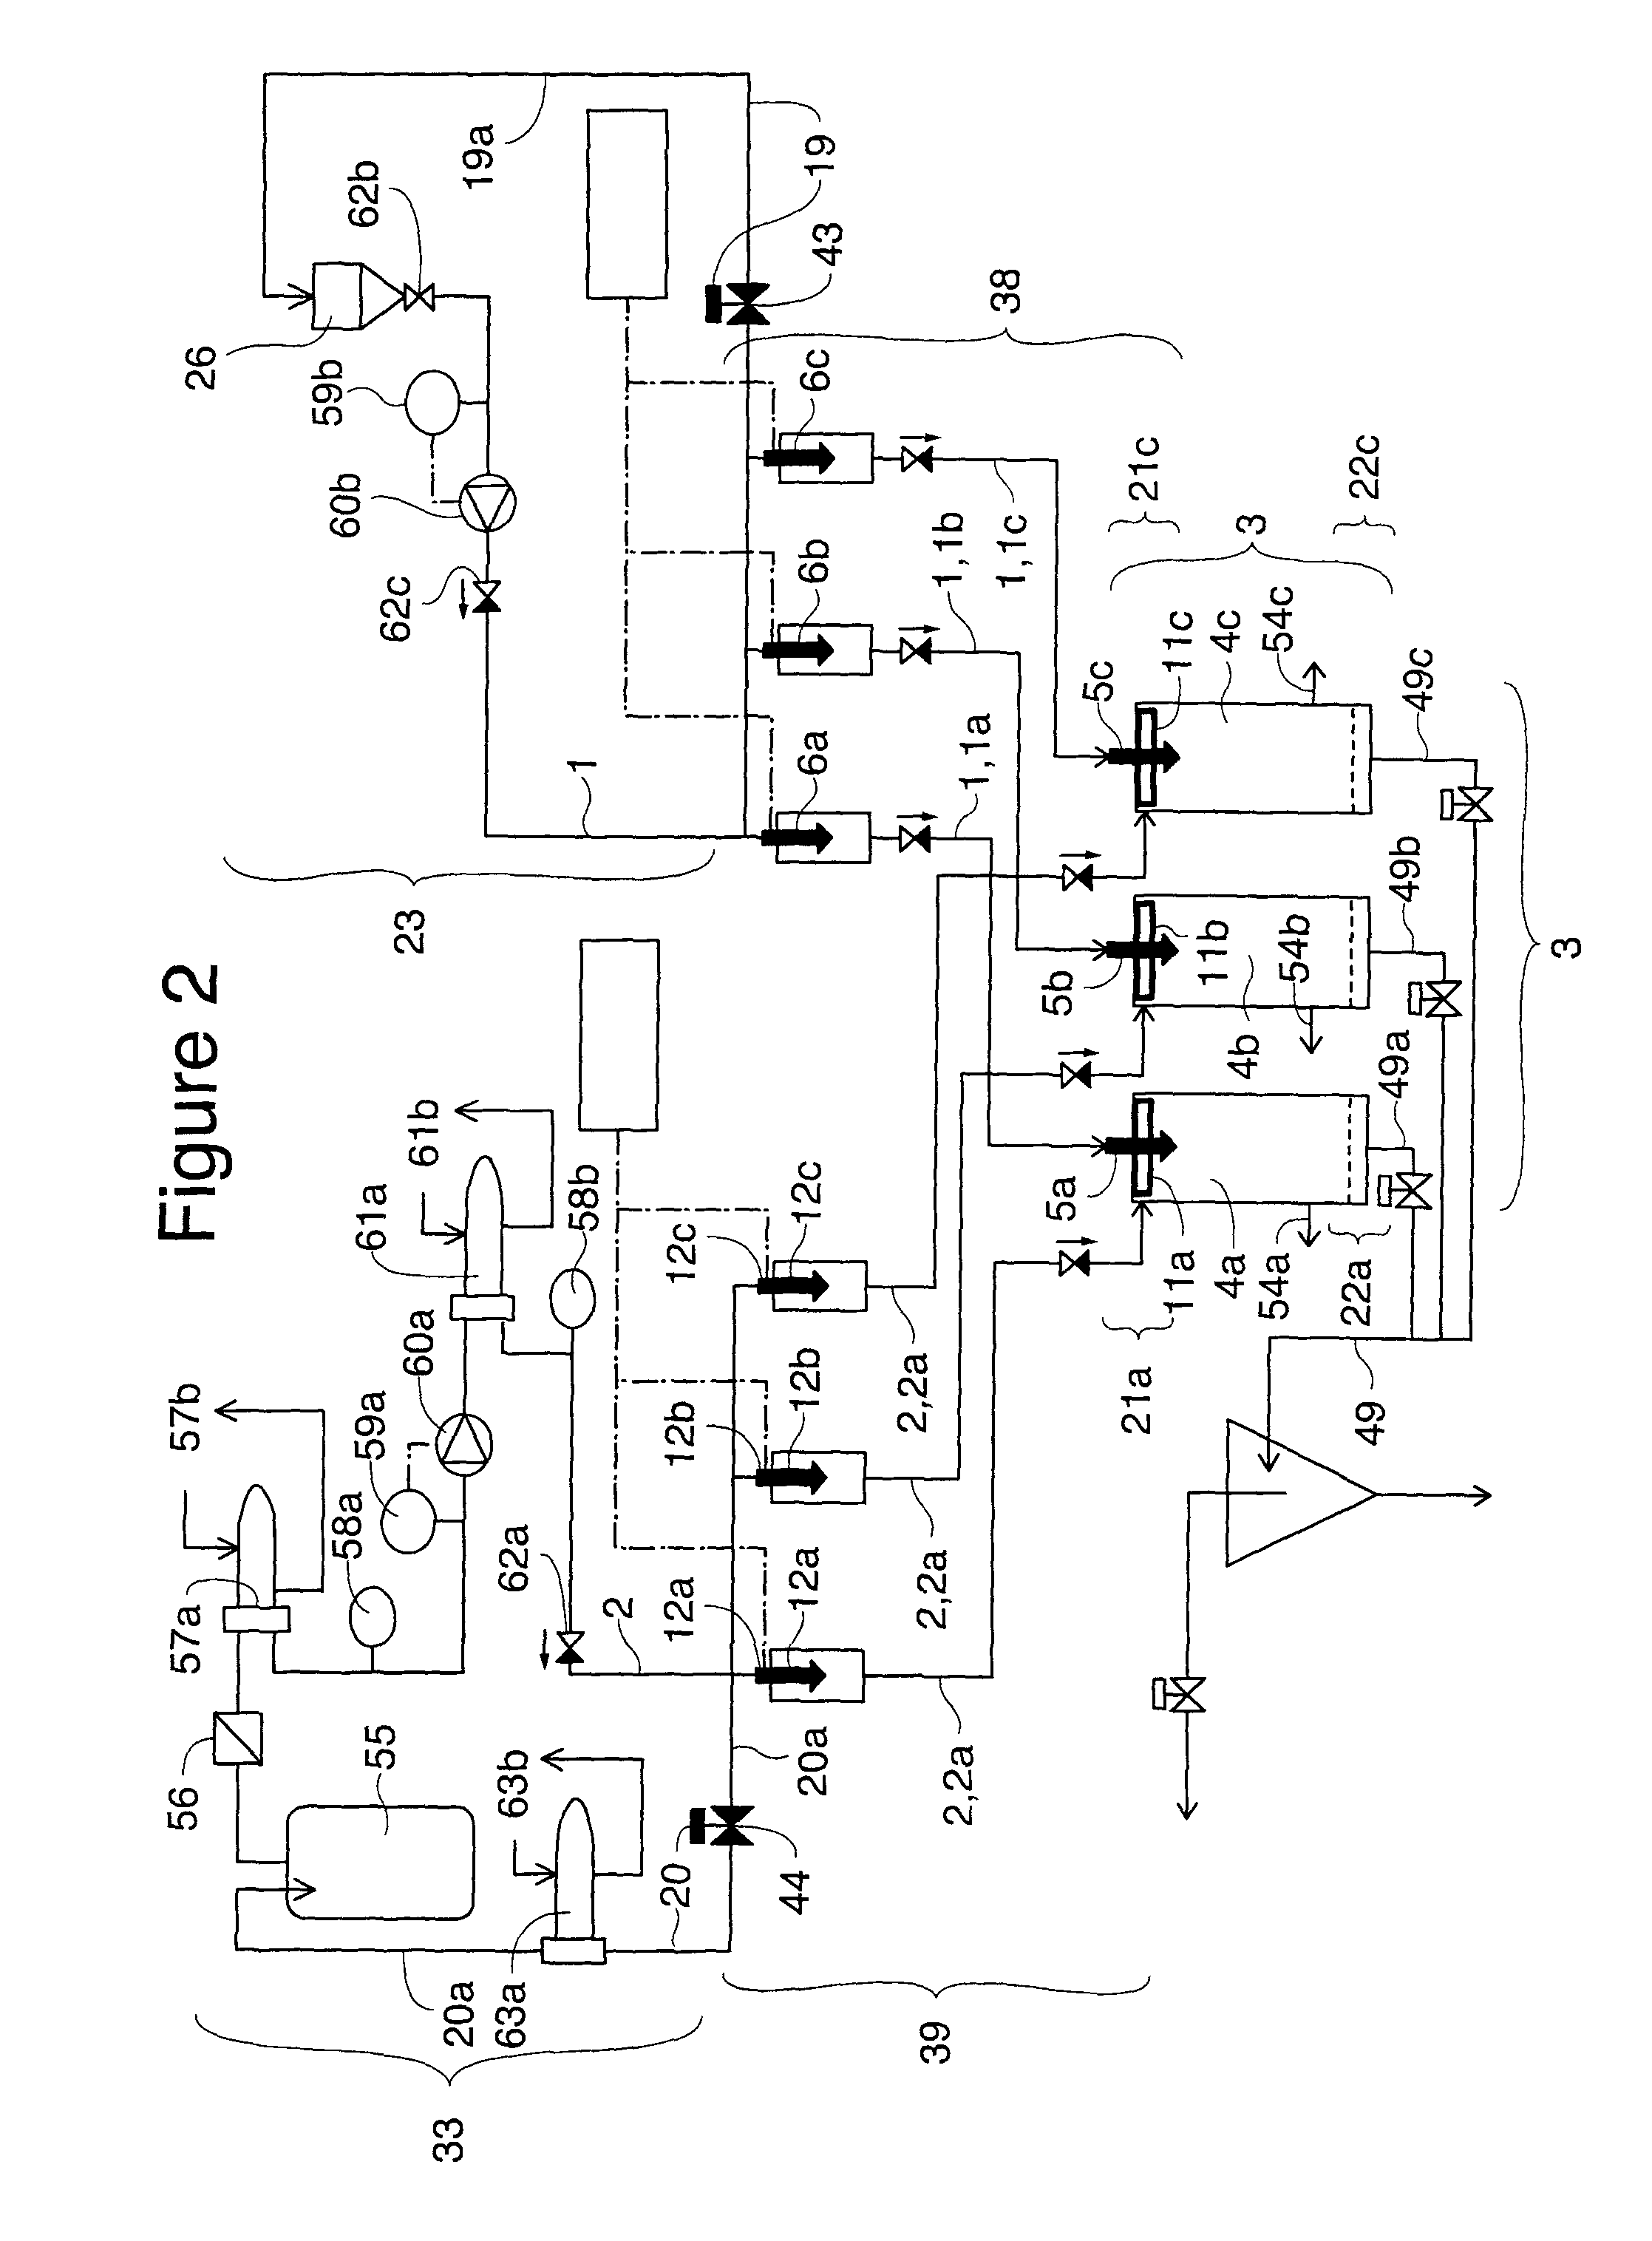 Apparatus and Method for the Production of Particles